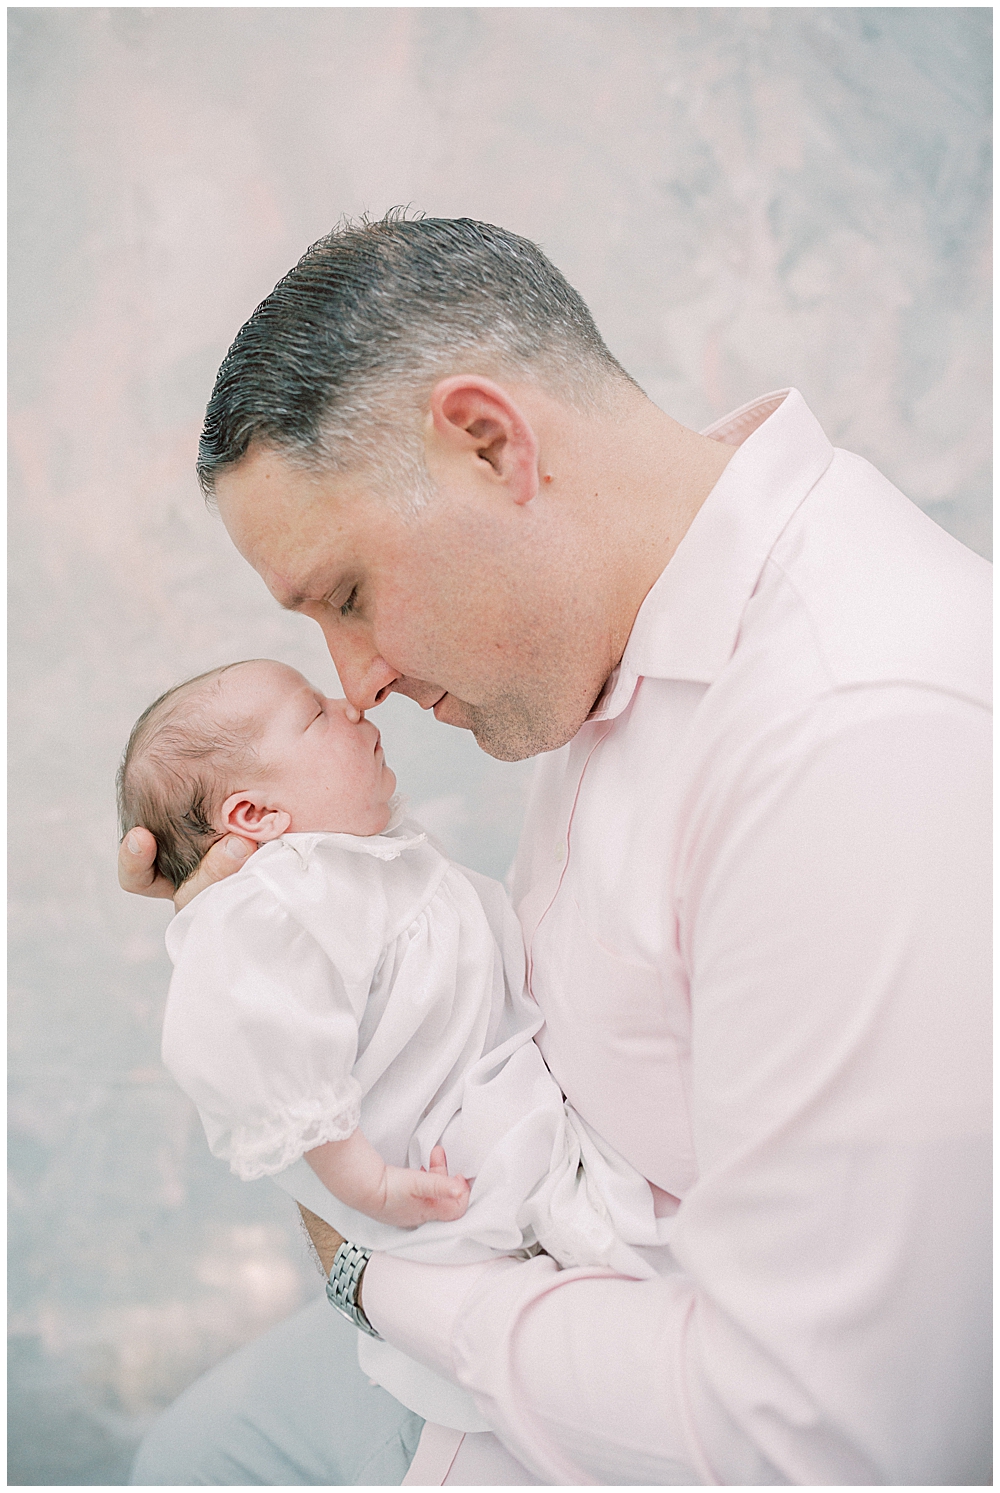 Father holds his newborn daughter up to nuzzle her on the nose